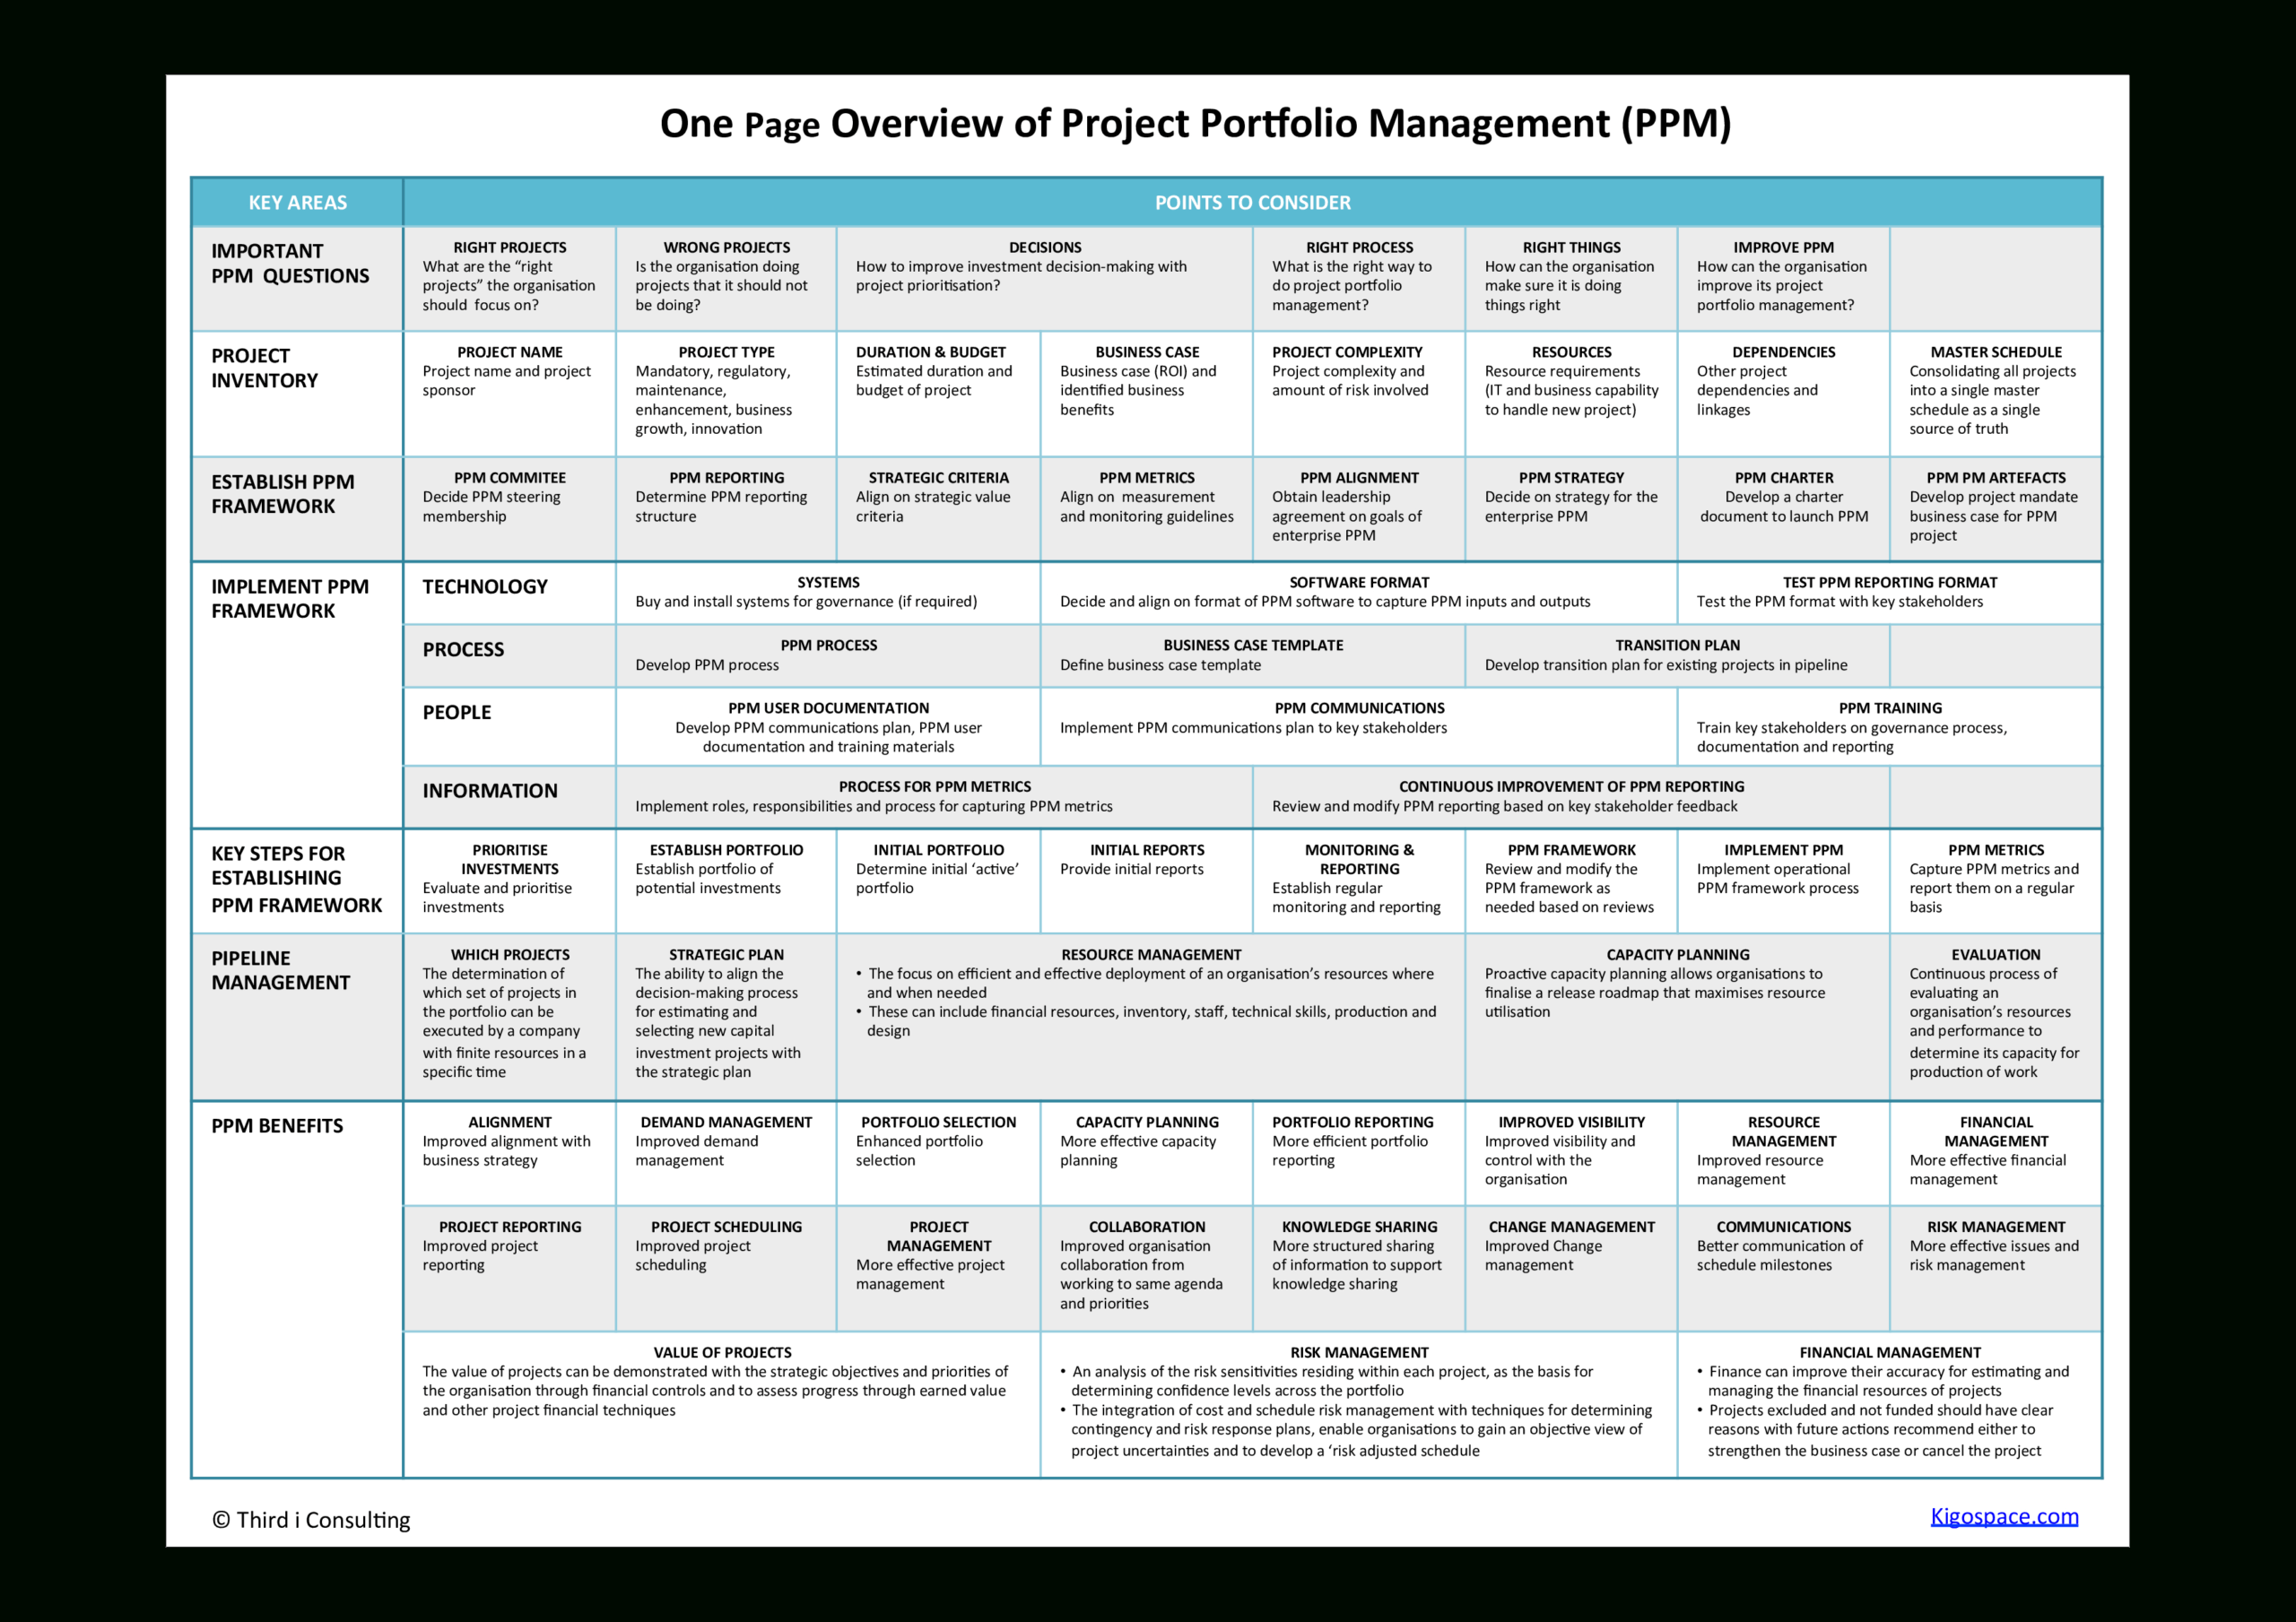 Project Portfolio Management One Page Overview With Portfolio Management Reporting Templates